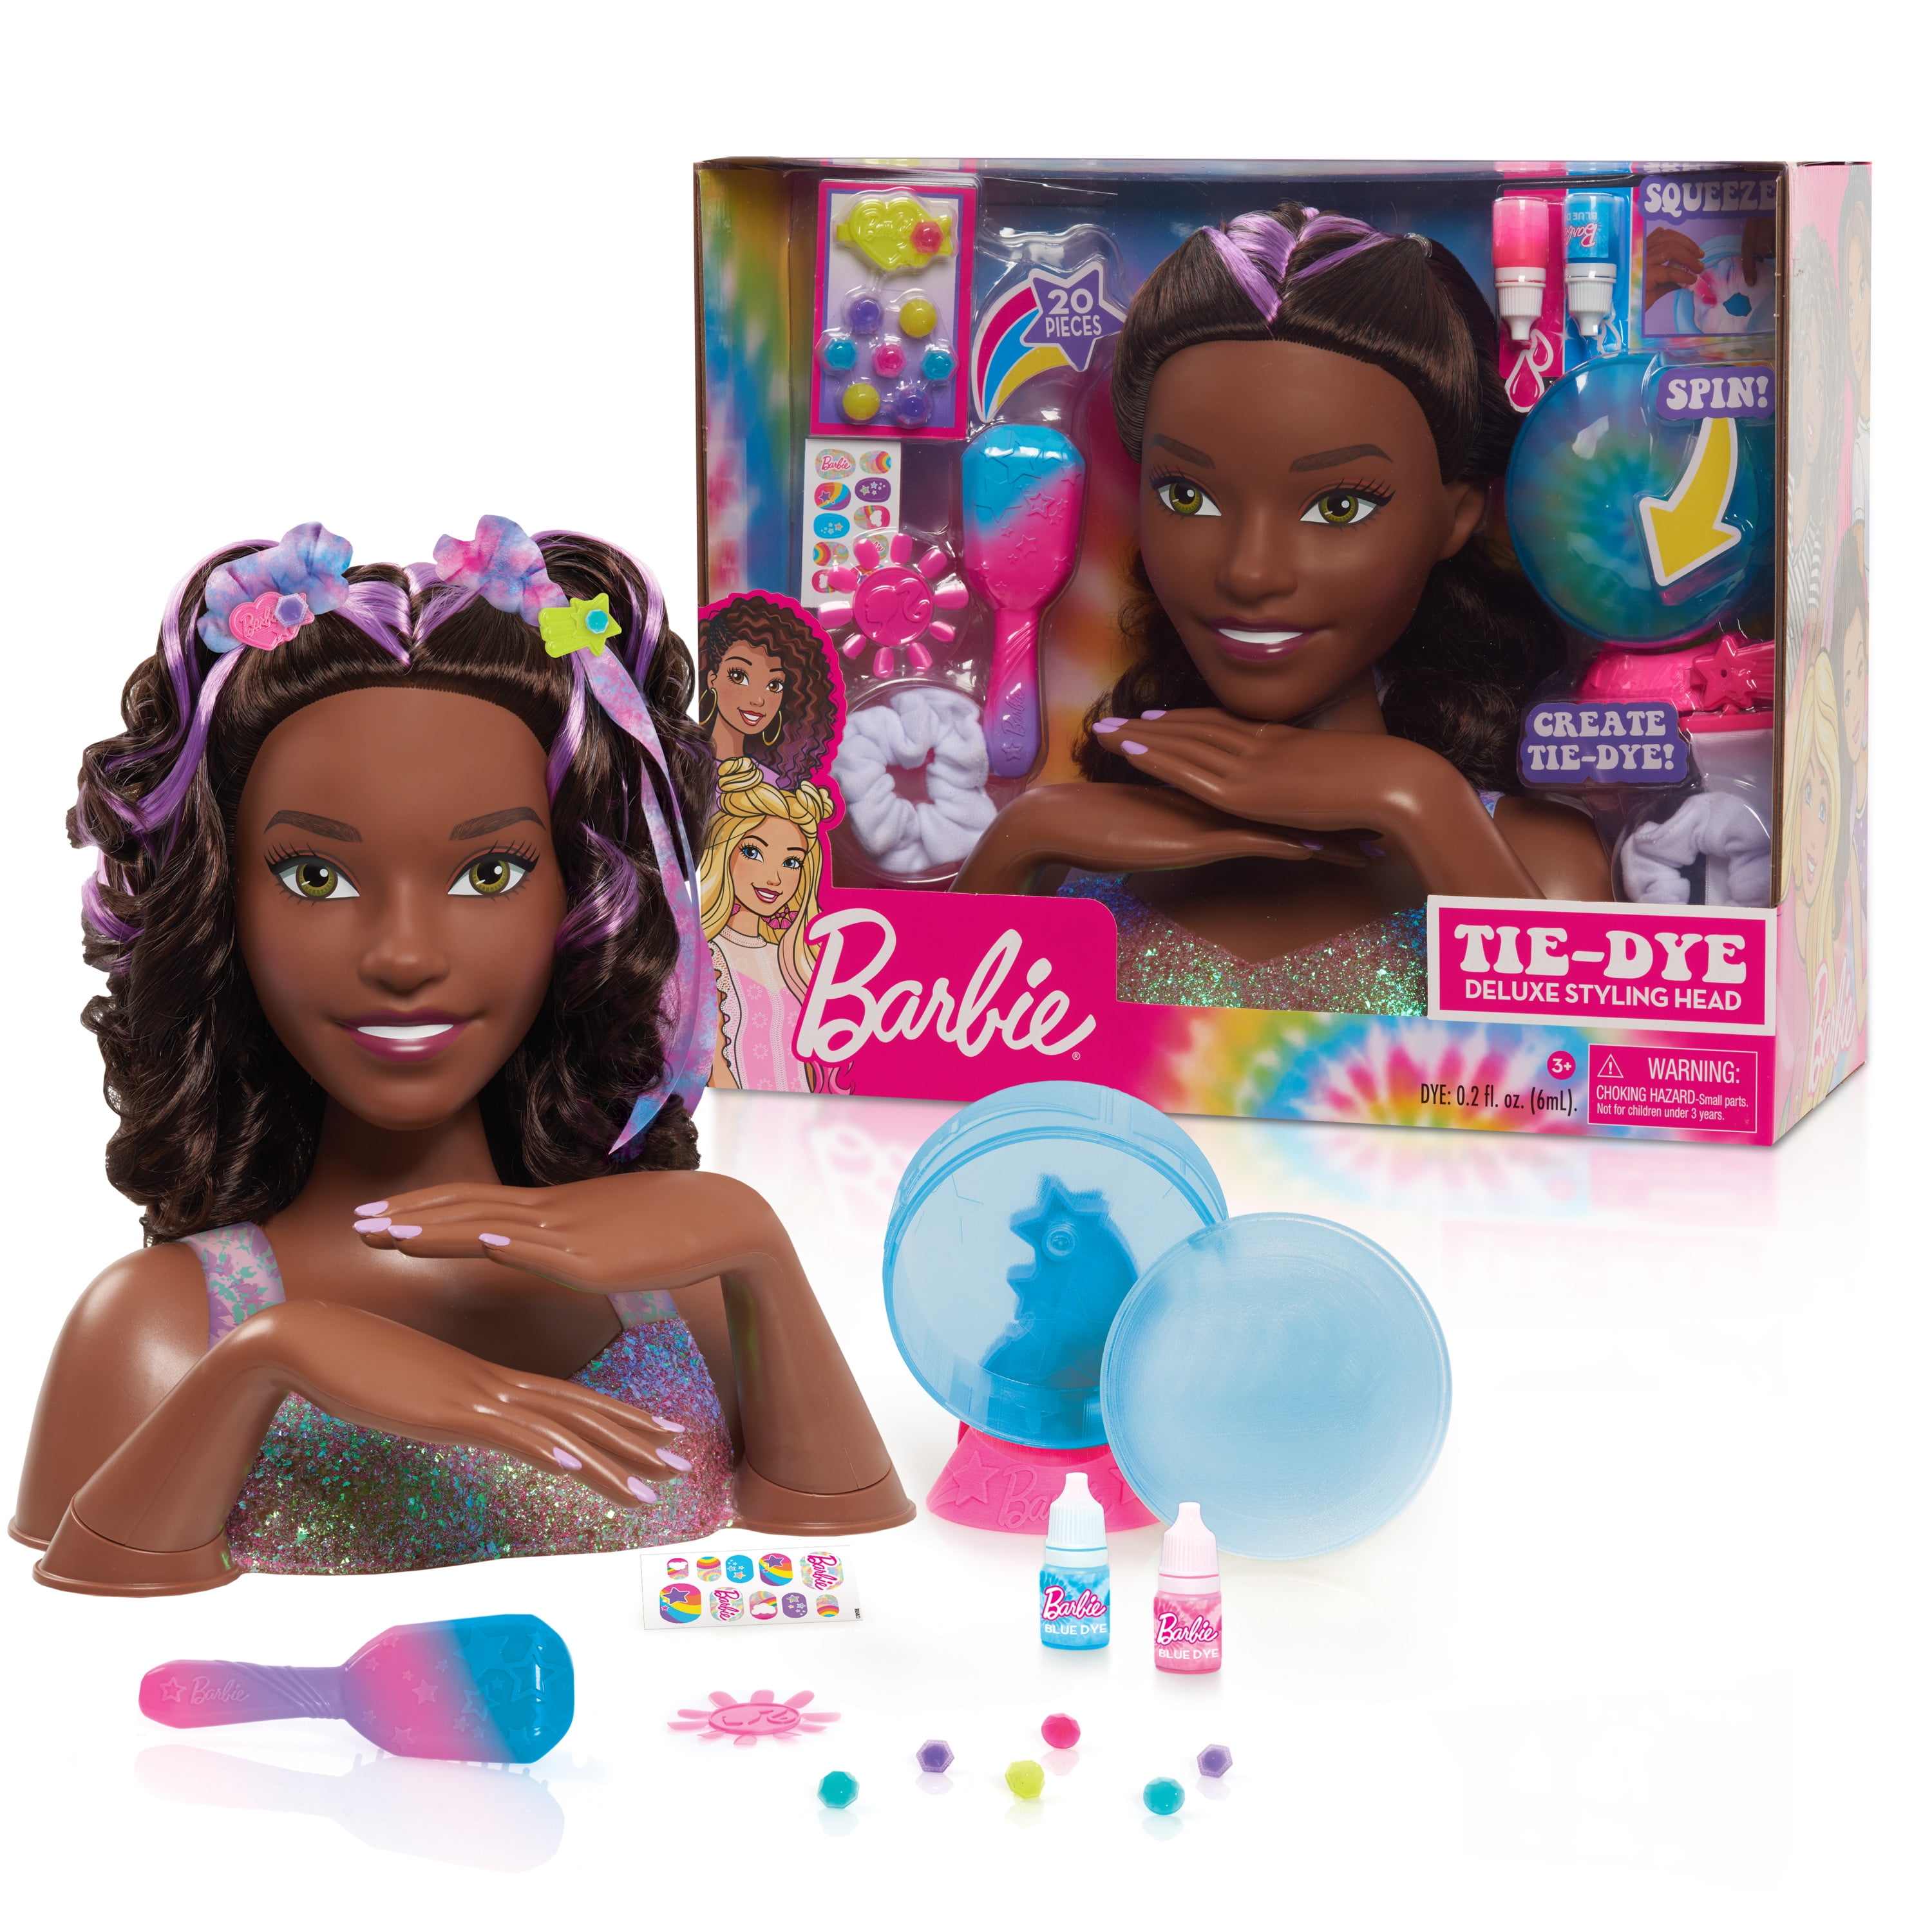 Barbie Tie-Dye Deluxe 21-Piece Styling Head, Black Hair, Includes 2 Non-Toxic Dye Colors,  Kids Toys for Ages 3 Up, Gifts and Presents